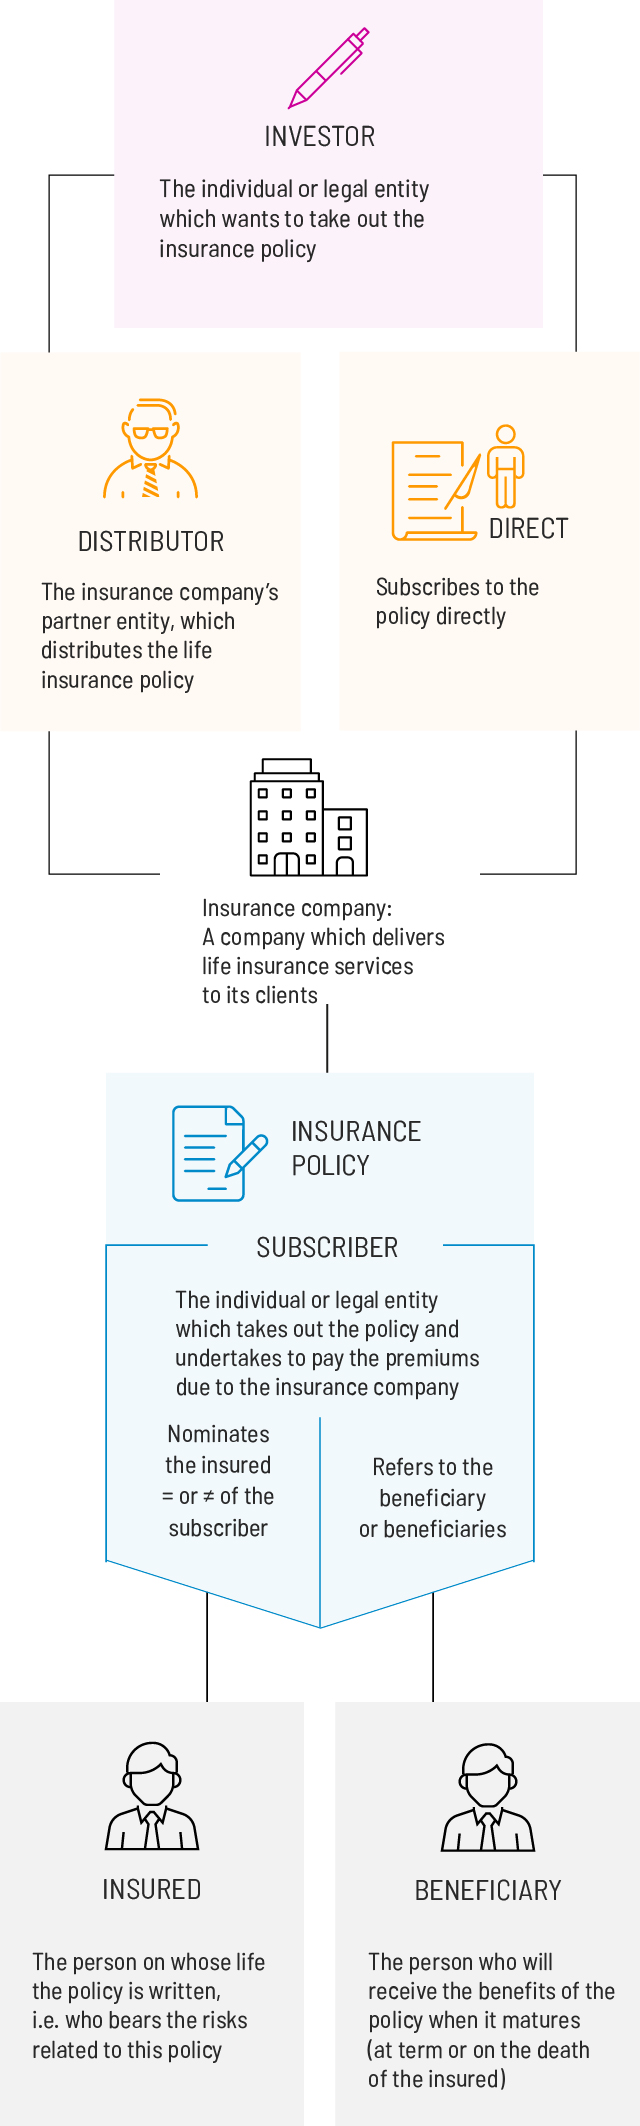 How a life insurance policy works